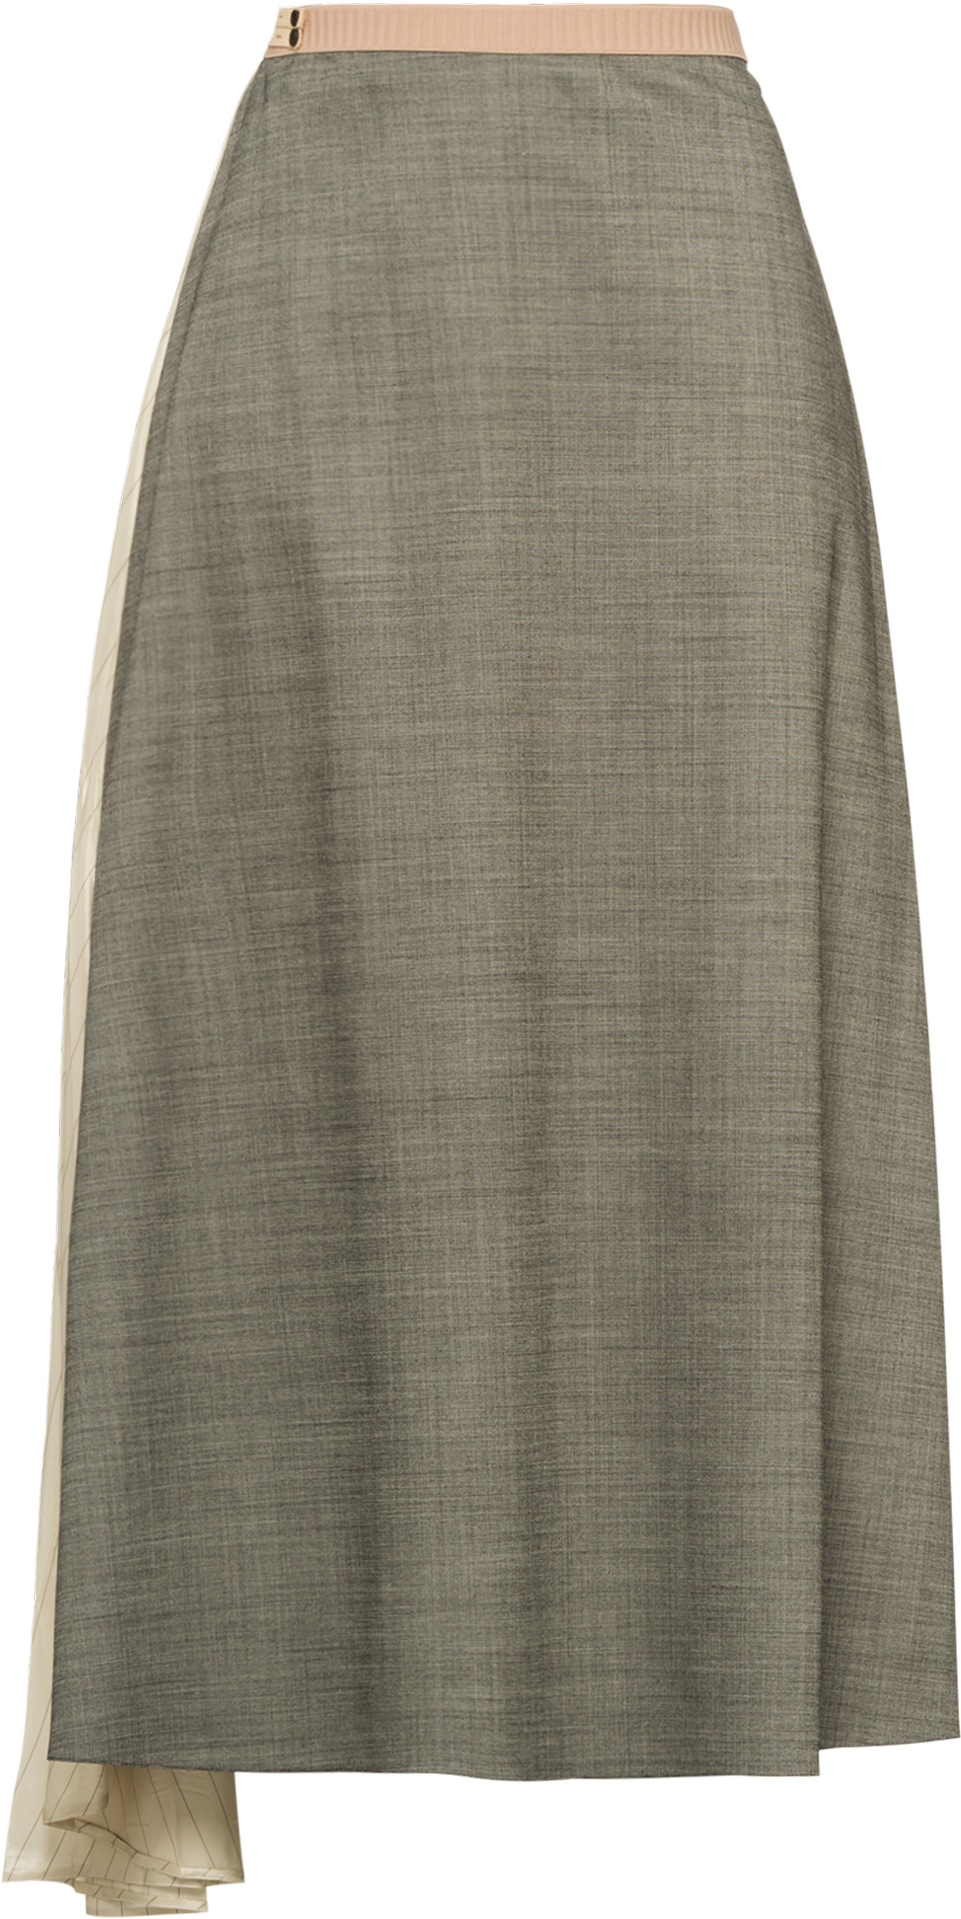 Olive Green Skirt Fabric Texture